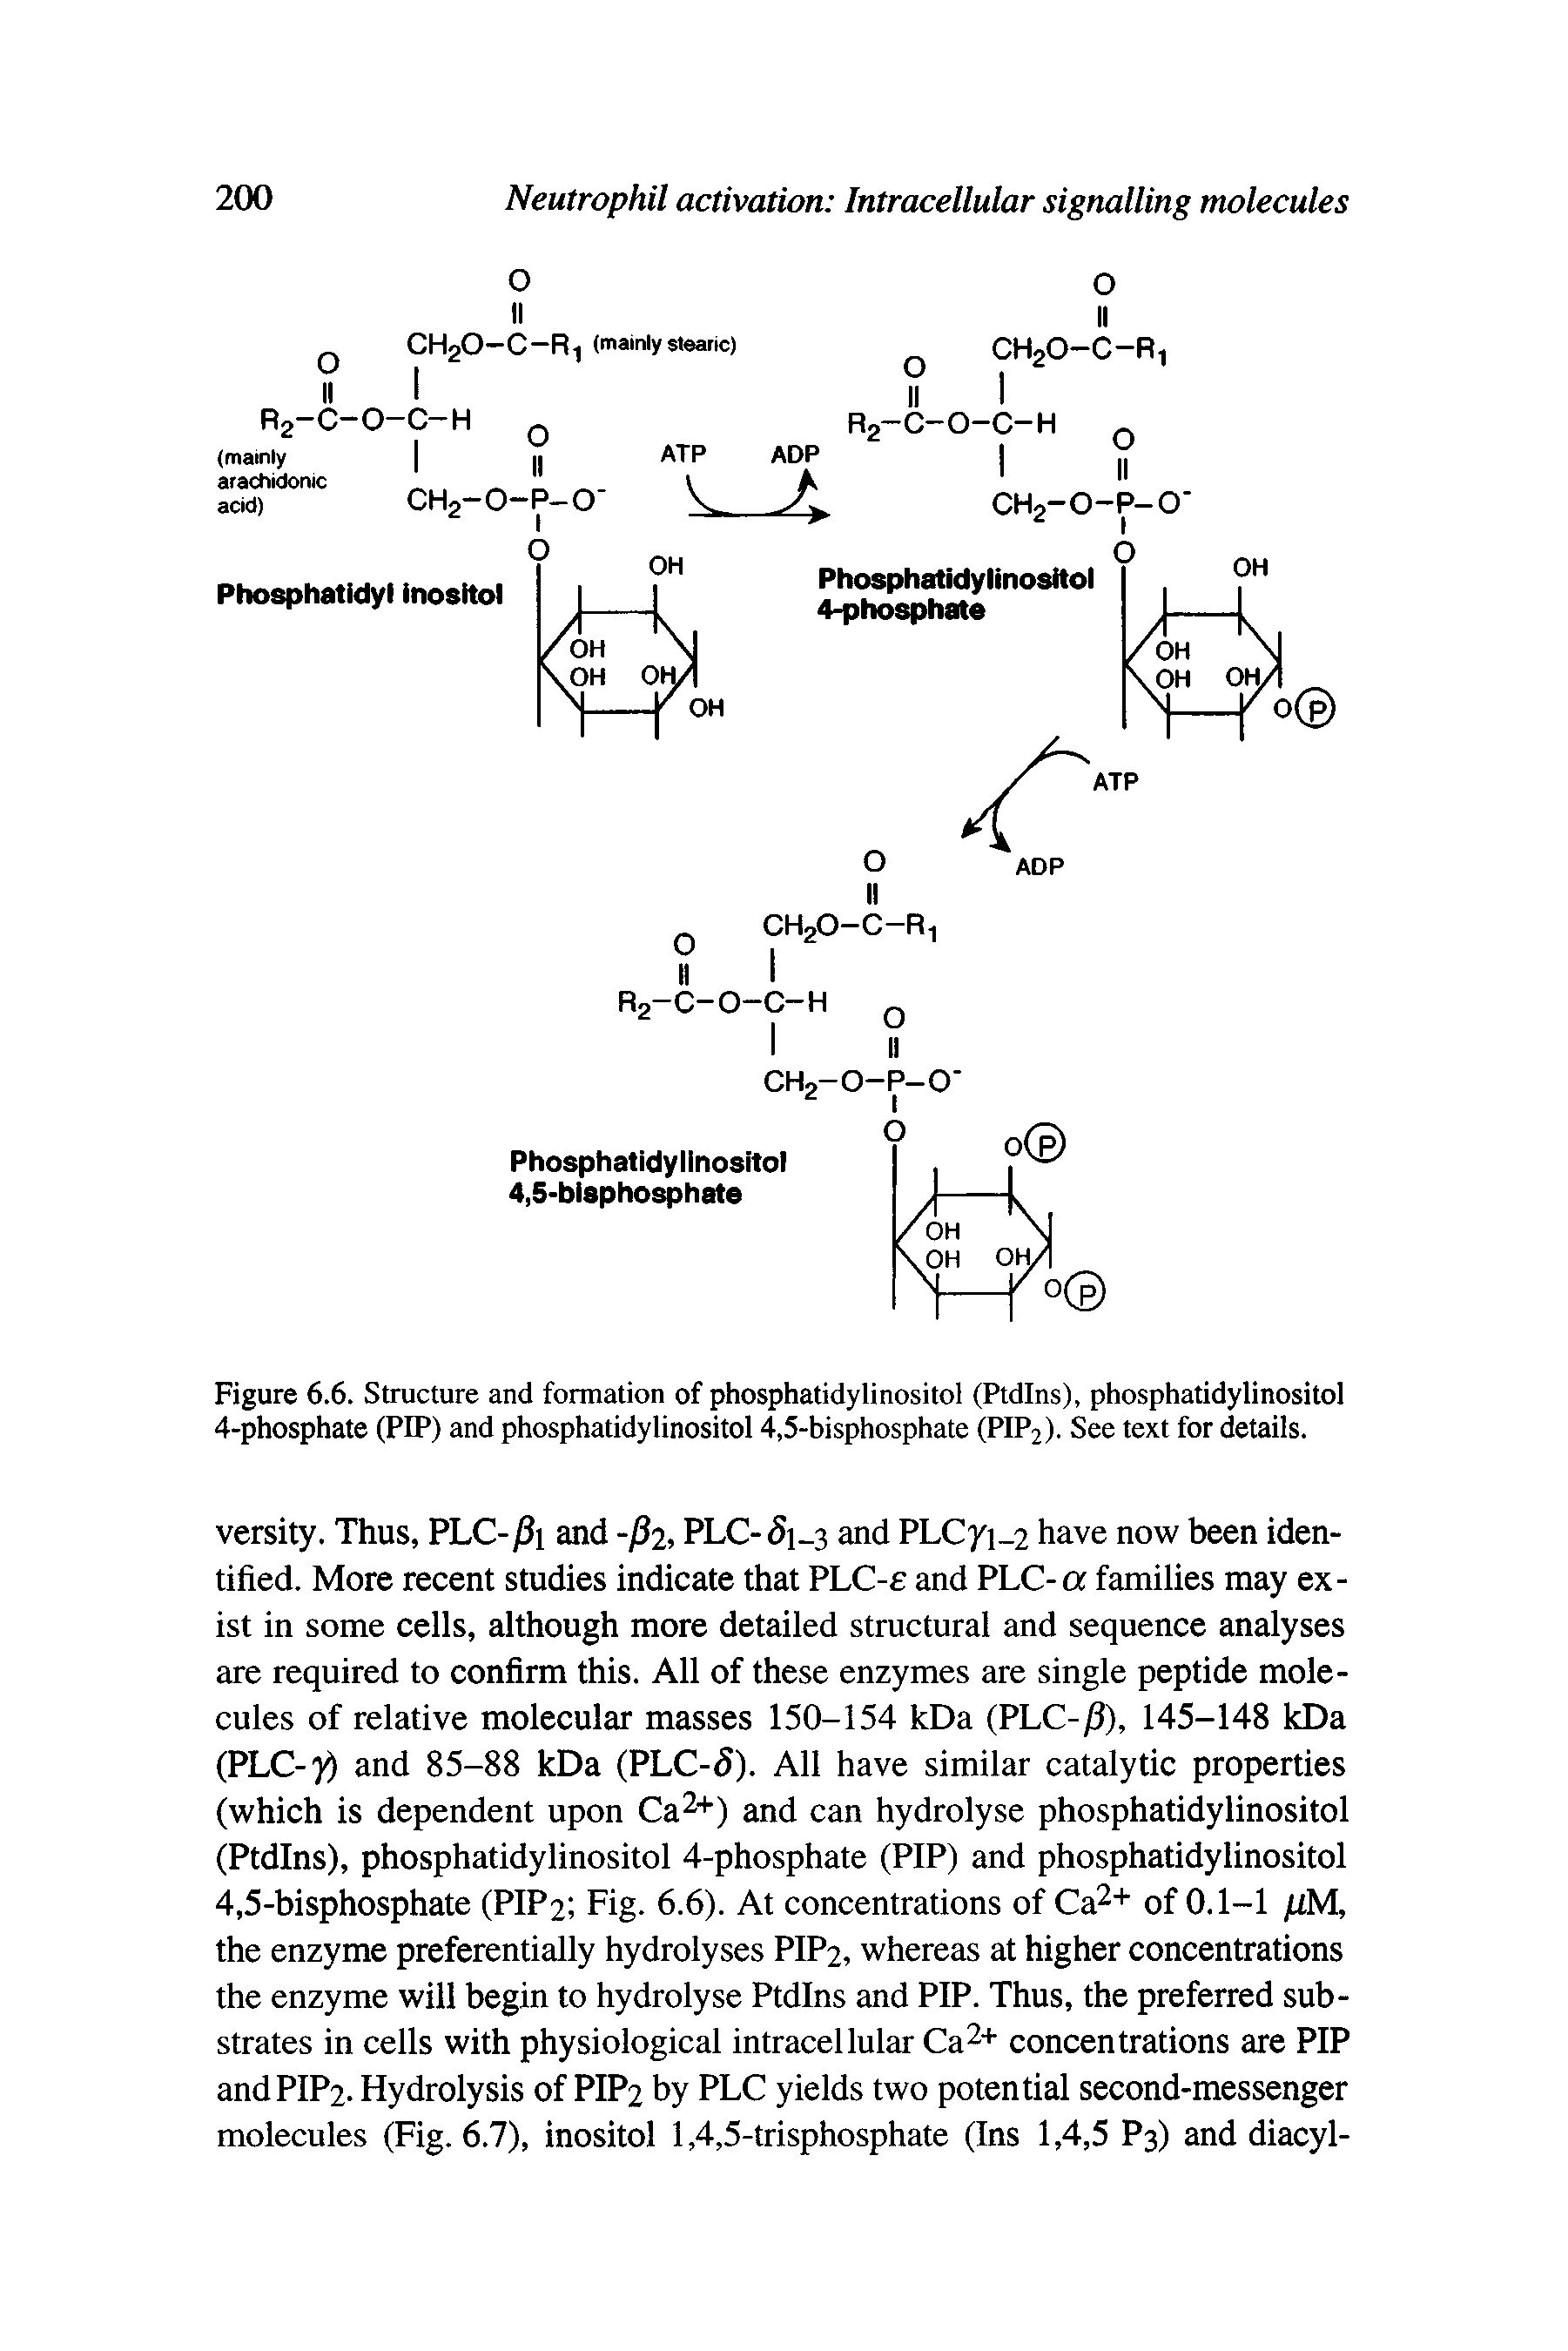 Figure 6.6. Structure and formation of phosphatidylinositol (Ptdlns), phosphatidylinositol 4-phosphate (PIP) and phosphatidylinositol 4,5-bisphosphate (PIP2). See text for details.